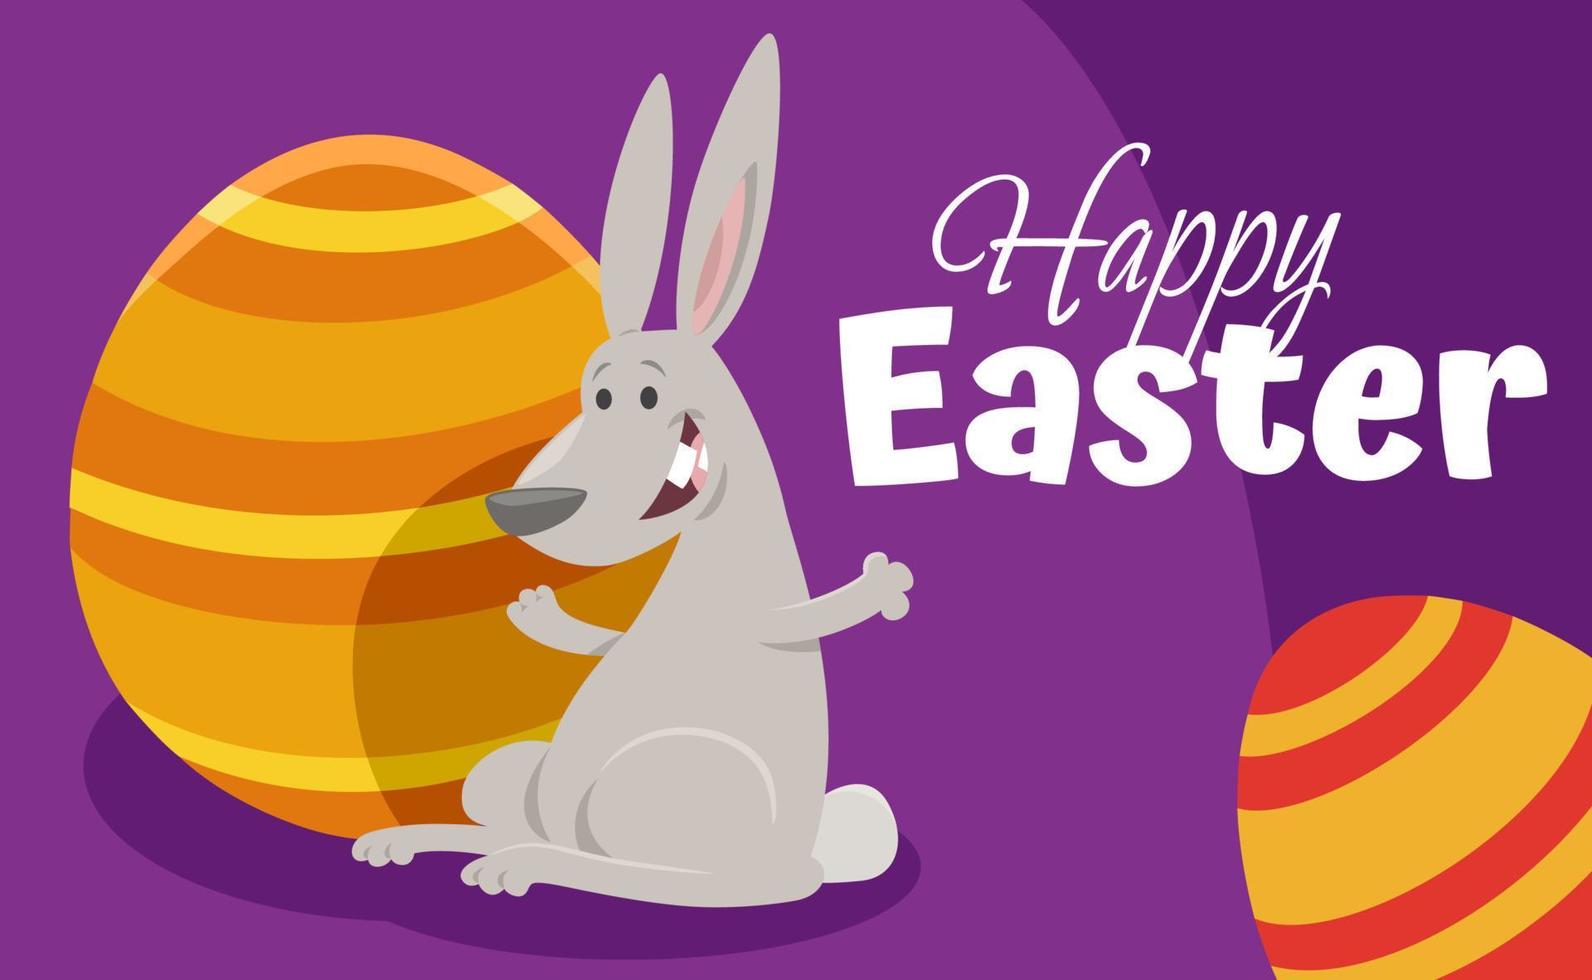 cartoon Easter bunny with painted egg greeting card vector